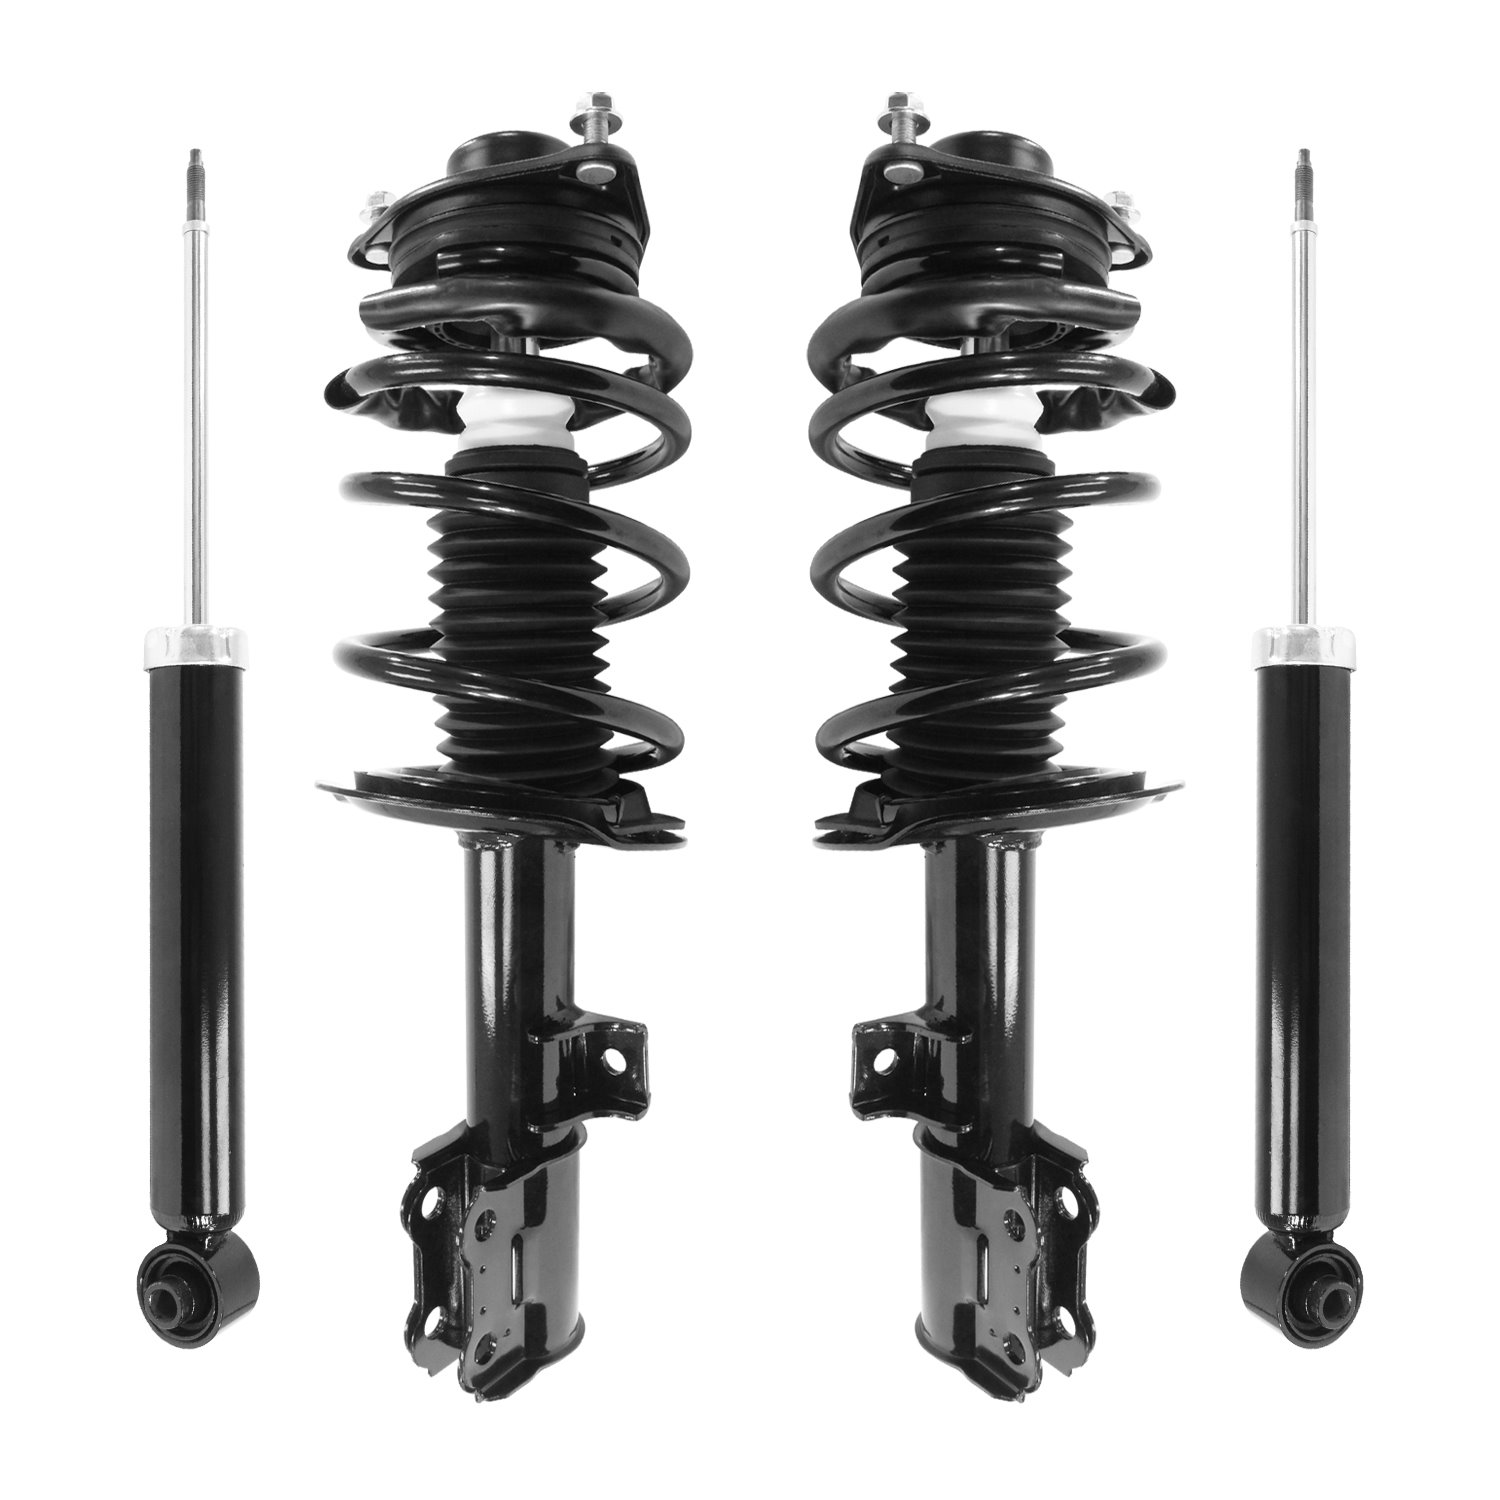 4-11163-259950-001 Front & Rear Suspension Strut & Coil Spring Assembly Fits Select Hyundai Genesis Coupe